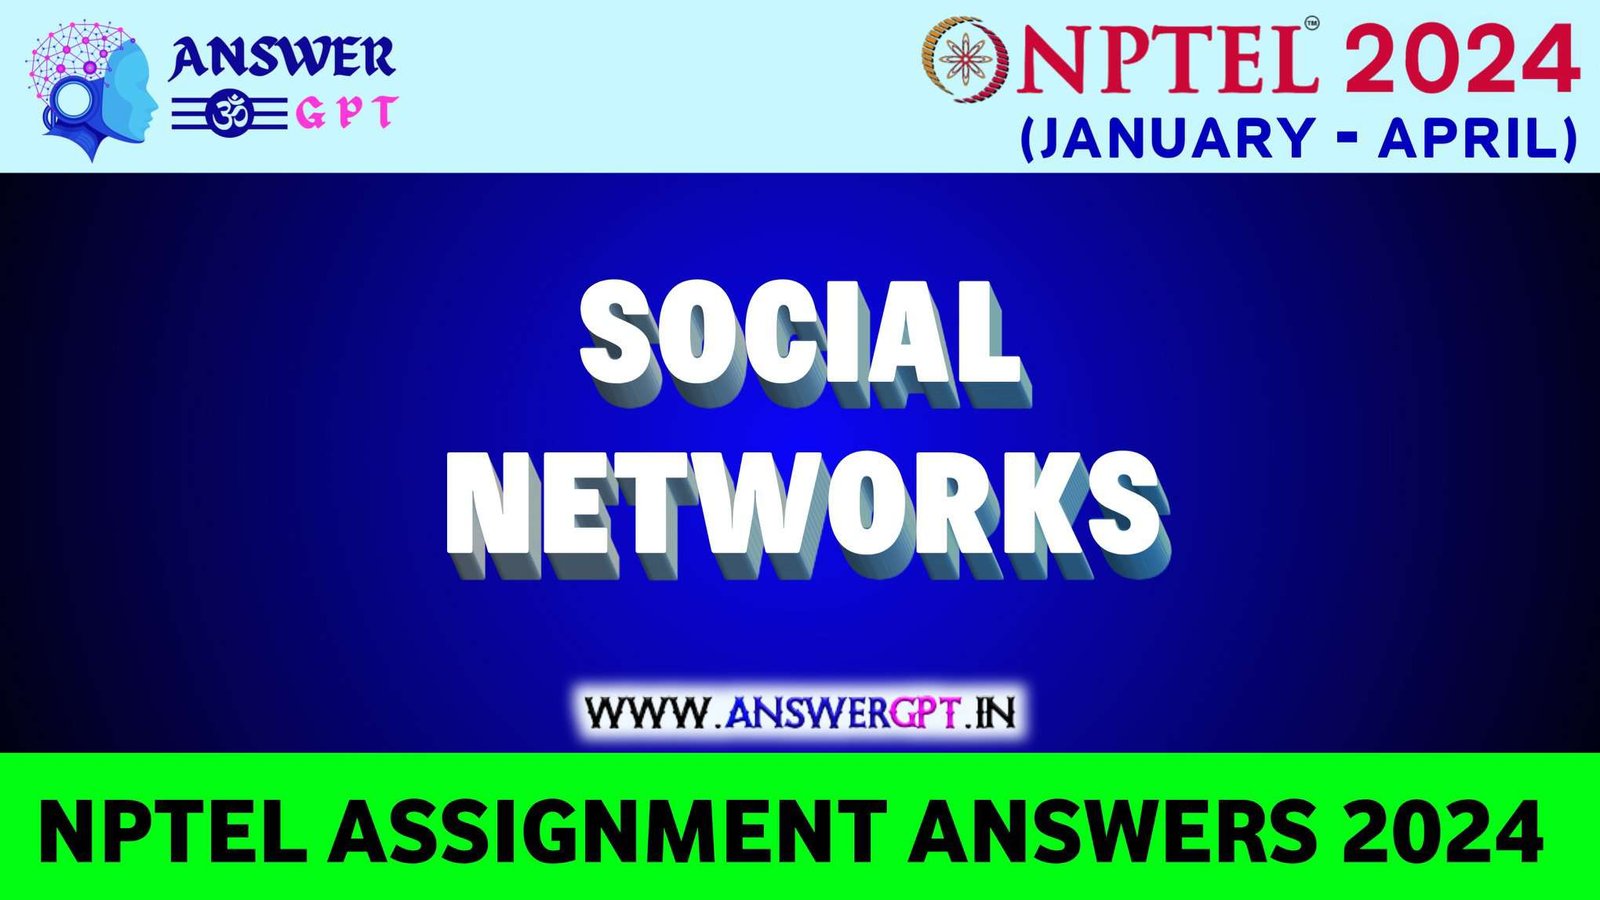 nptel introduction to machine learning assignment answers week 4 2023